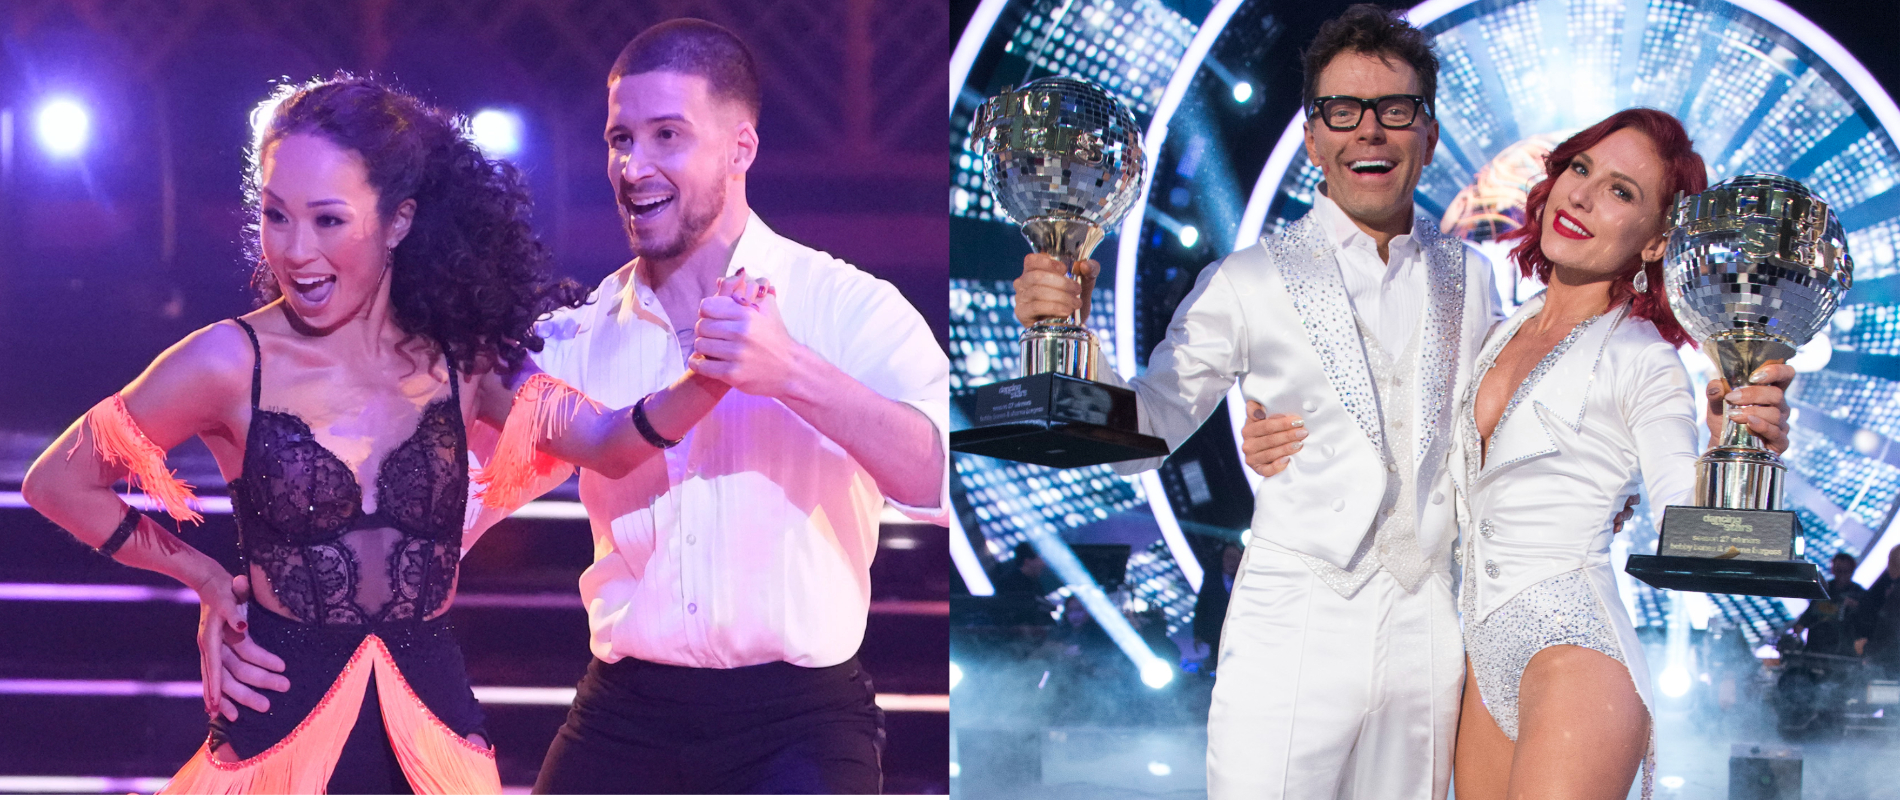 'Dancing with the Stars' performers Koko Iwasaki, Vinny Guadagnino, Bobby Bones,a nd Sharna Burgess in side by side photographs.